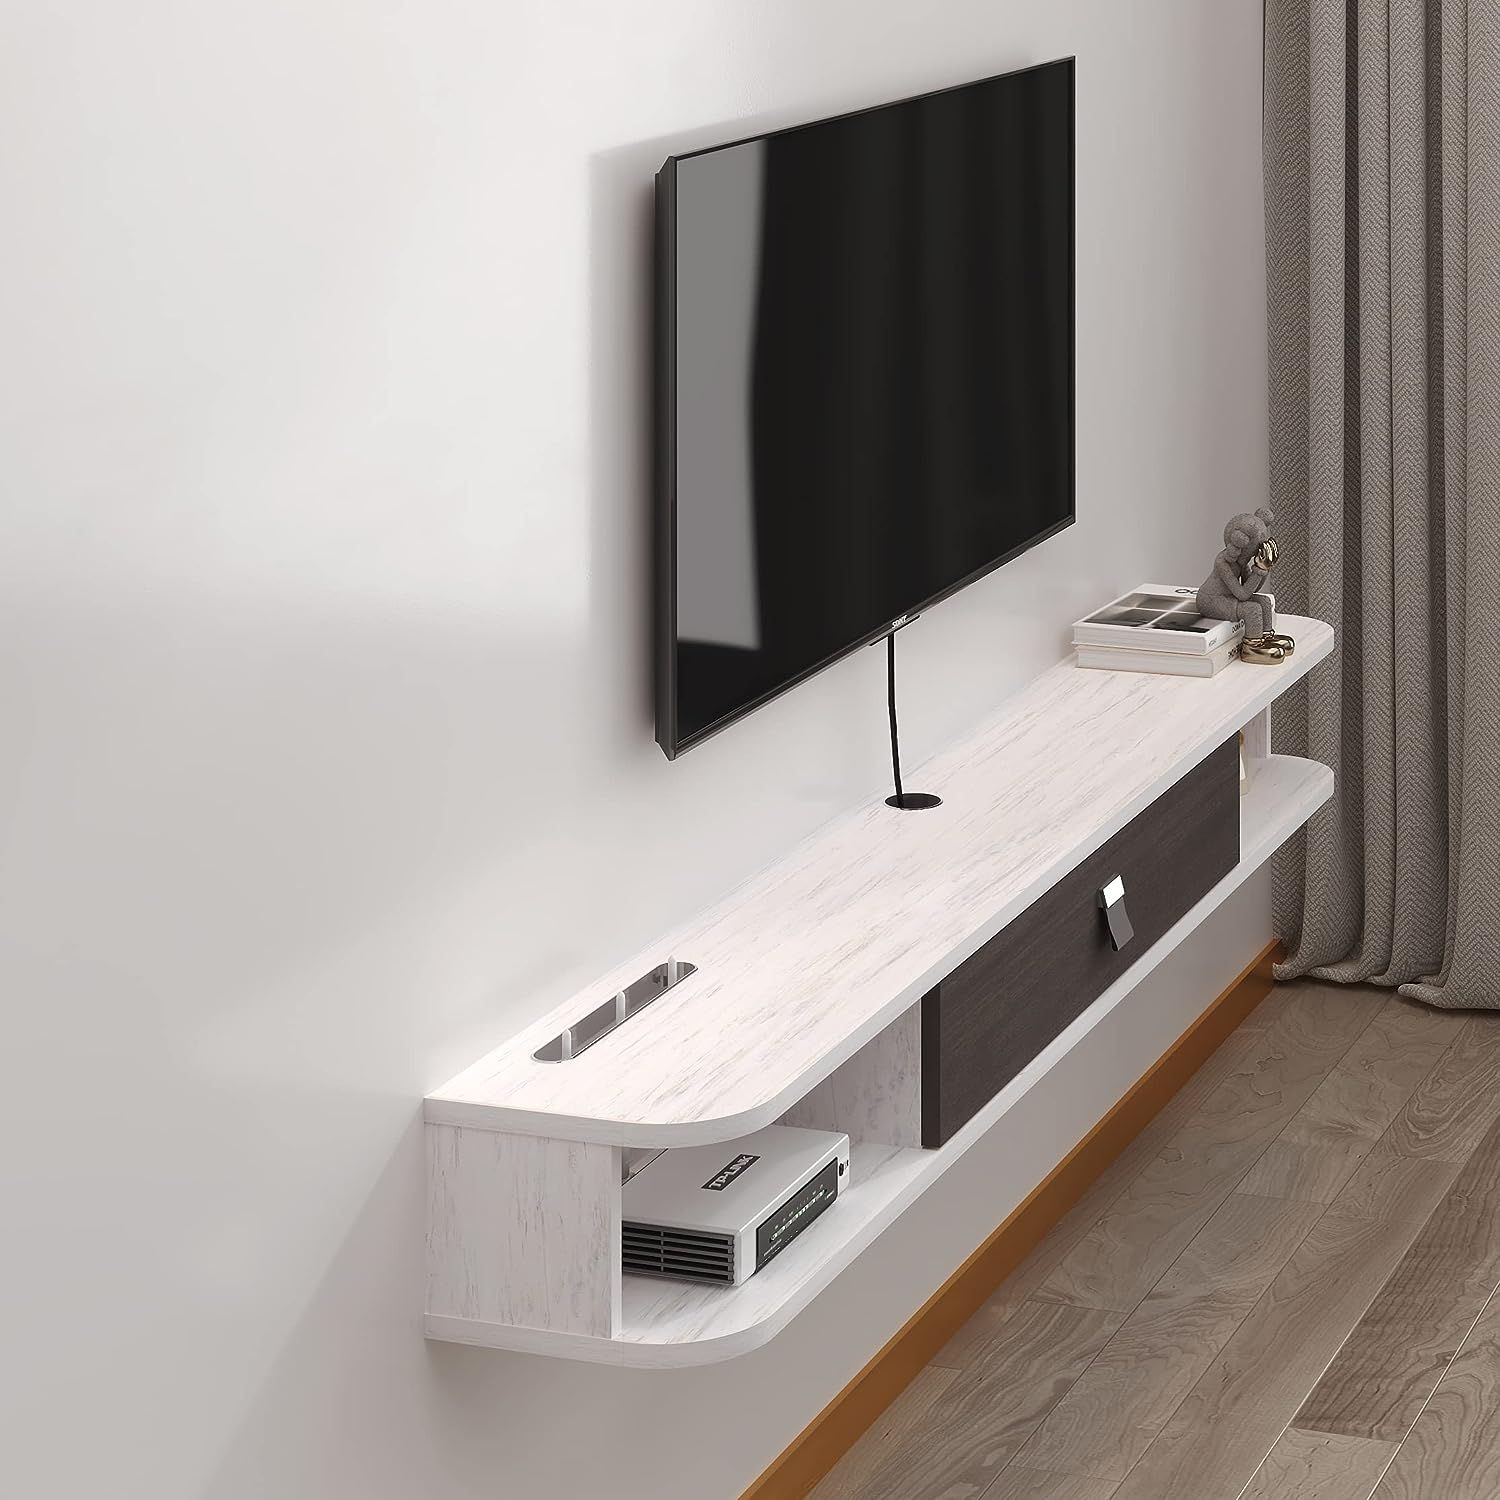 Modern Wall Mounted Floating Tv Console With Storage Italy | Ubuy With Wall Mounted Floating Tv Stands (View 2 of 15)